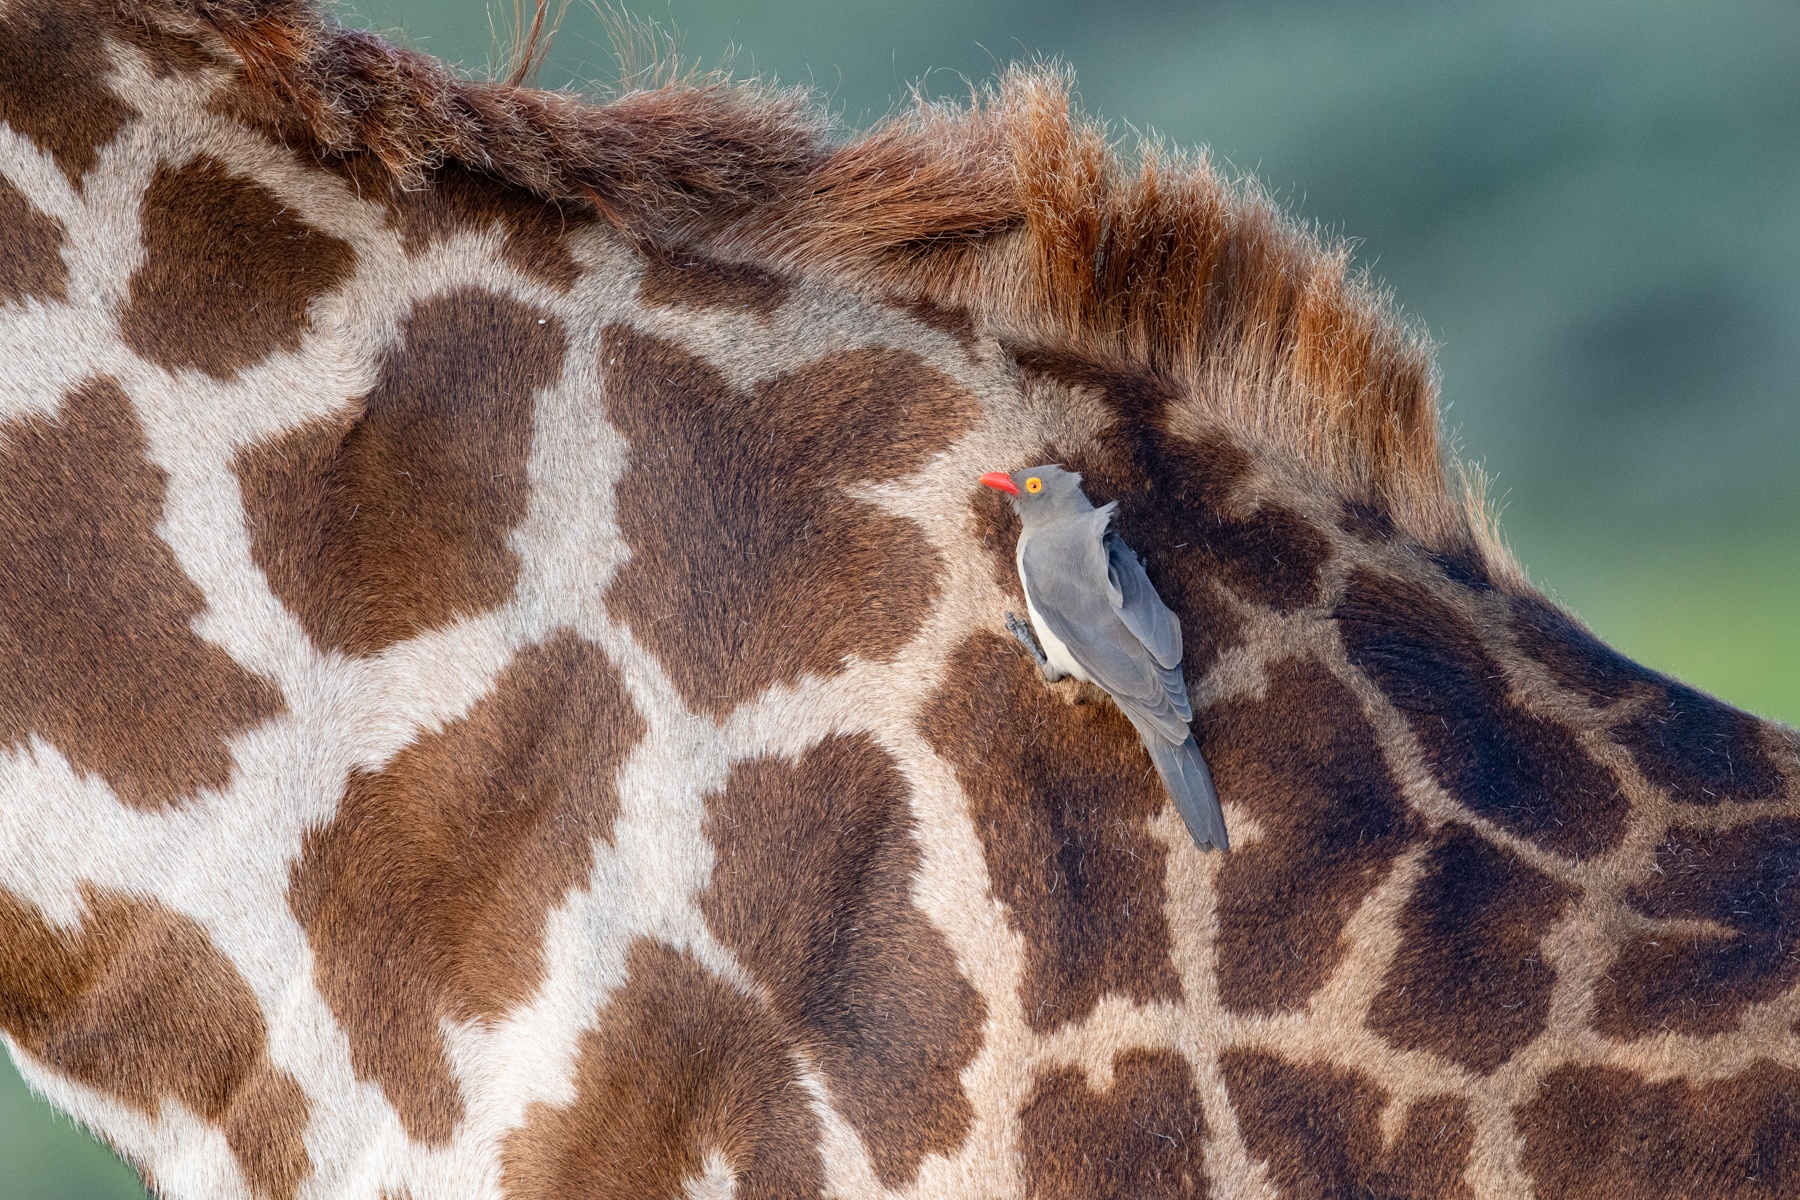 Yellow-billed Oxpecker searching the fur on a giraffe's neck for food